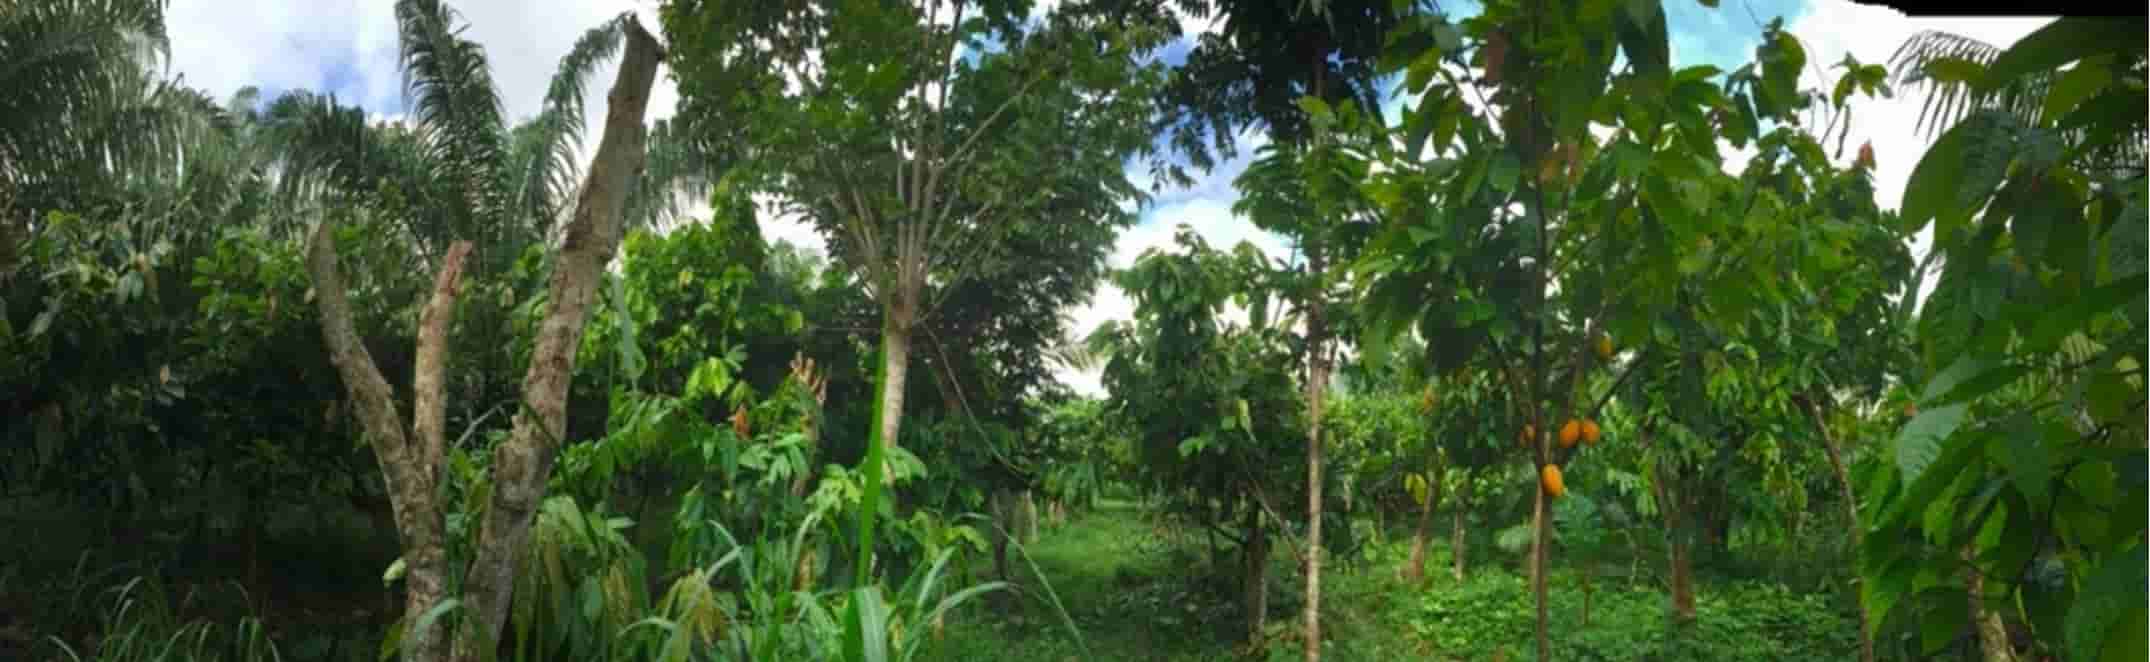 Agroforestry after 10 years